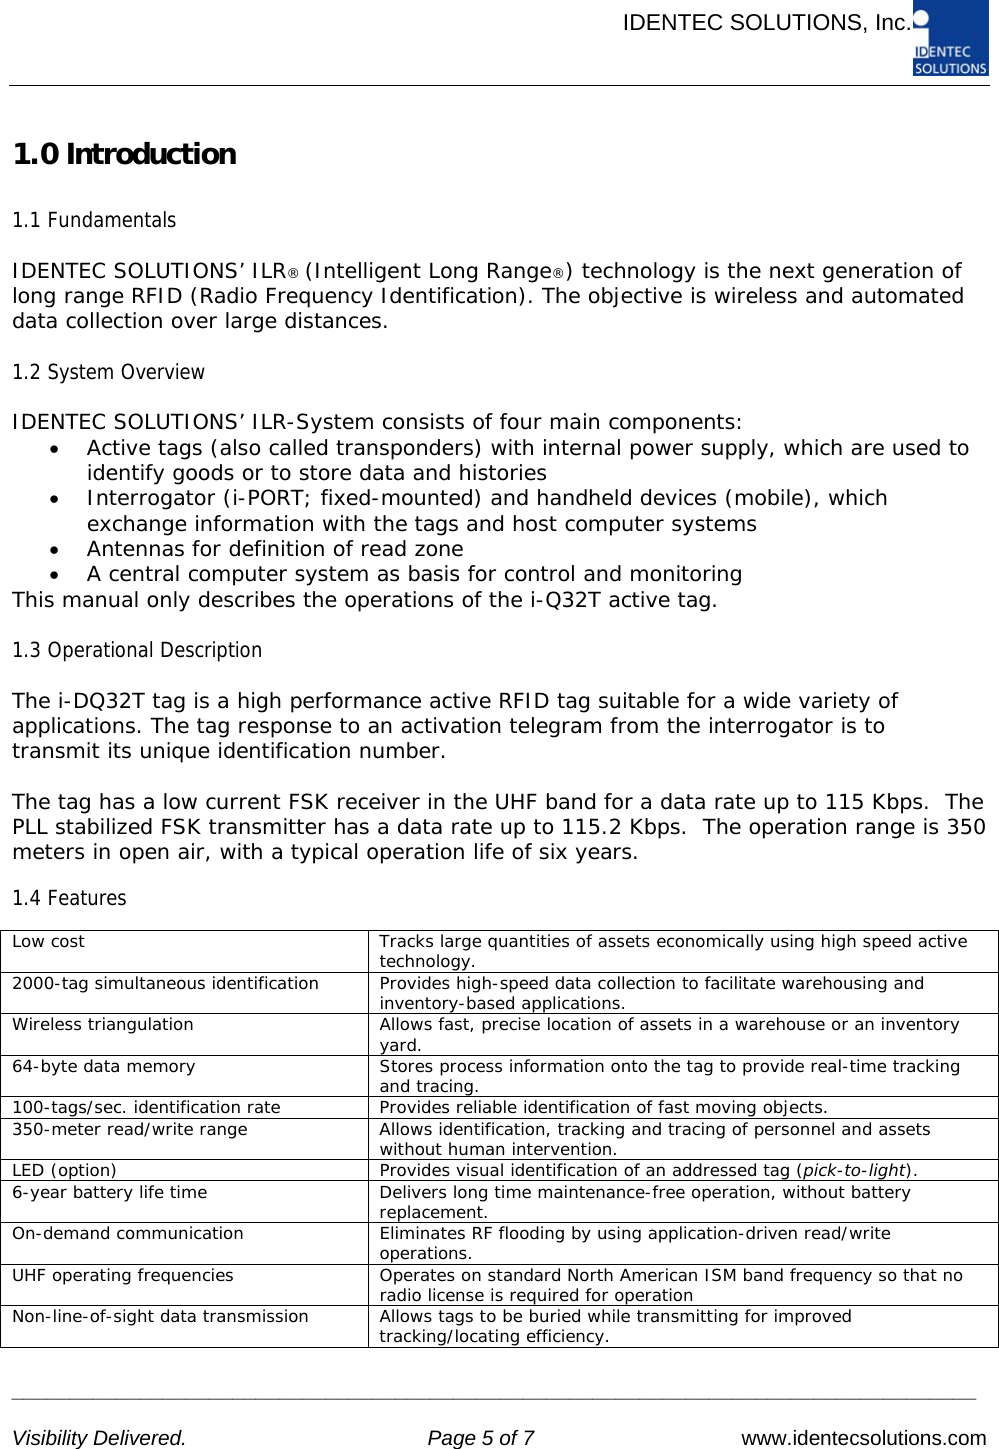      IDENTEC SOLUTIONS, Inc.     ___________________________________________________________________________________   Visibility Delivered.  Page 5 of 7   www.identecsolutions.com 1.0 Introduction  1.1 Fundamentals  IDENTEC SOLUTIONS’ ILR® (Intelligent Long Range®) technology is the next generation of long range RFID (Radio Frequency Identification). The objective is wireless and automated data collection over large distances.  1.2 System Overview  IDENTEC SOLUTIONS’ ILR-System consists of four main components: • Active tags (also called transponders) with internal power supply, which are used to identify goods or to store data and histories • Interrogator (i-PORT; fixed-mounted) and handheld devices (mobile), which exchange information with the tags and host computer systems • Antennas for definition of read zone • A central computer system as basis for control and monitoring This manual only describes the operations of the i-Q32T active tag.  1.3 Operational Description  The i-DQ32T tag is a high performance active RFID tag suitable for a wide variety of applications. The tag response to an activation telegram from the interrogator is to transmit its unique identification number.  The tag has a low current FSK receiver in the UHF band for a data rate up to 115 Kbps.  The PLL stabilized FSK transmitter has a data rate up to 115.2 Kbps.  The operation range is 350 meters in open air, with a typical operation life of six years.  1.4 Features  Low cost  Tracks large quantities of assets economically using high speed active technology. 2000-tag simultaneous identification  Provides high-speed data collection to facilitate warehousing and inventory-based applications. Wireless triangulation  Allows fast, precise location of assets in a warehouse or an inventory yard. 64-byte data memory  Stores process information onto the tag to provide real-time tracking and tracing. 100-tags/sec. identification rate  Provides reliable identification of fast moving objects. 350-meter read/write range  Allows identification, tracking and tracing of personnel and assets without human intervention. LED (option)  Provides visual identification of an addressed tag (pick-to-light). 6-year battery life time  Delivers long time maintenance-free operation, without battery replacement. On-demand communication  Eliminates RF flooding by using application-driven read/write operations. UHF operating frequencies  Operates on standard North American ISM band frequency so that no radio license is required for operation Non-line-of-sight data transmission  Allows tags to be buried while transmitting for improved tracking/locating efficiency.  